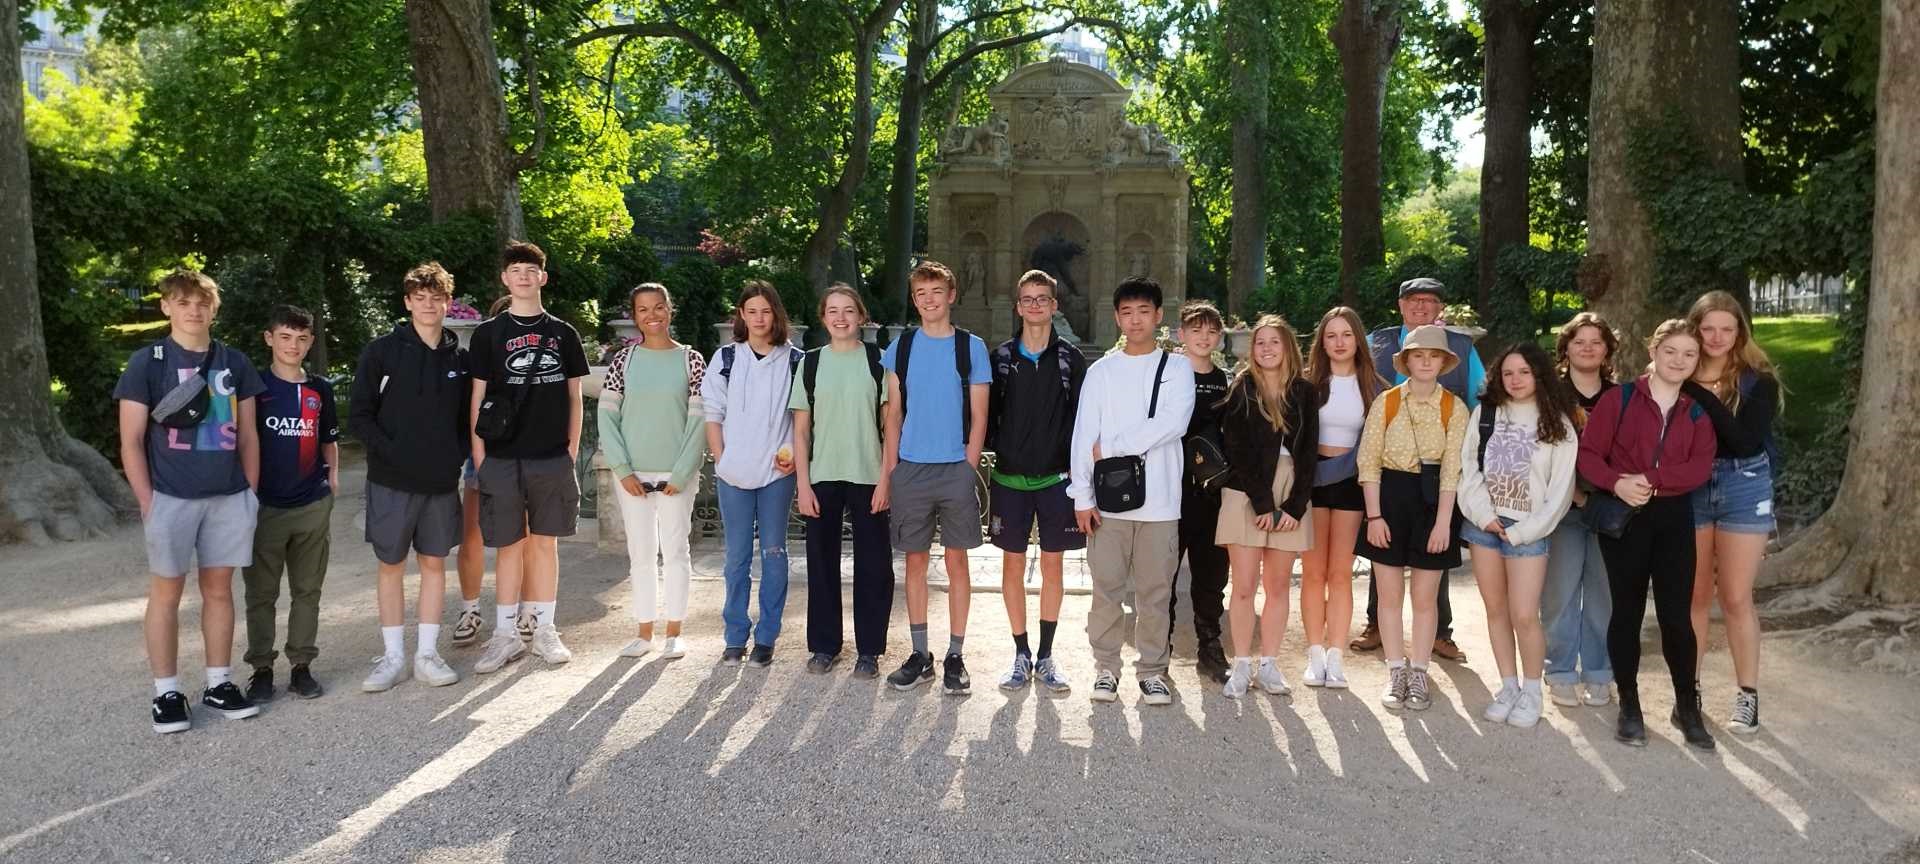 Pupils in a park during their exchange trip to France